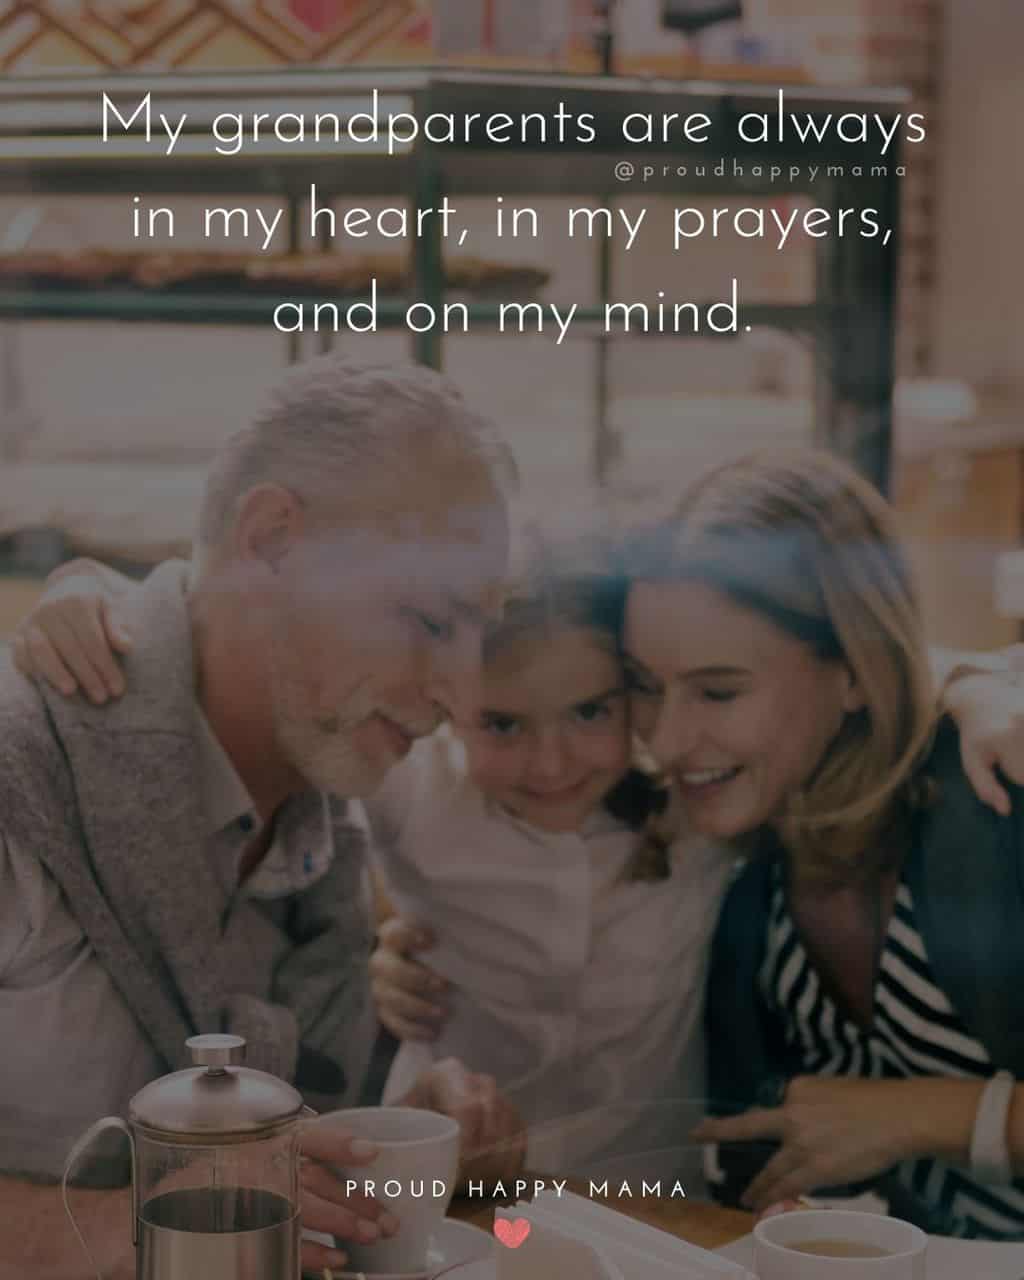 Grandparent Quotes – My grandparents are always in my heart, in my prayers, and on my mind.’